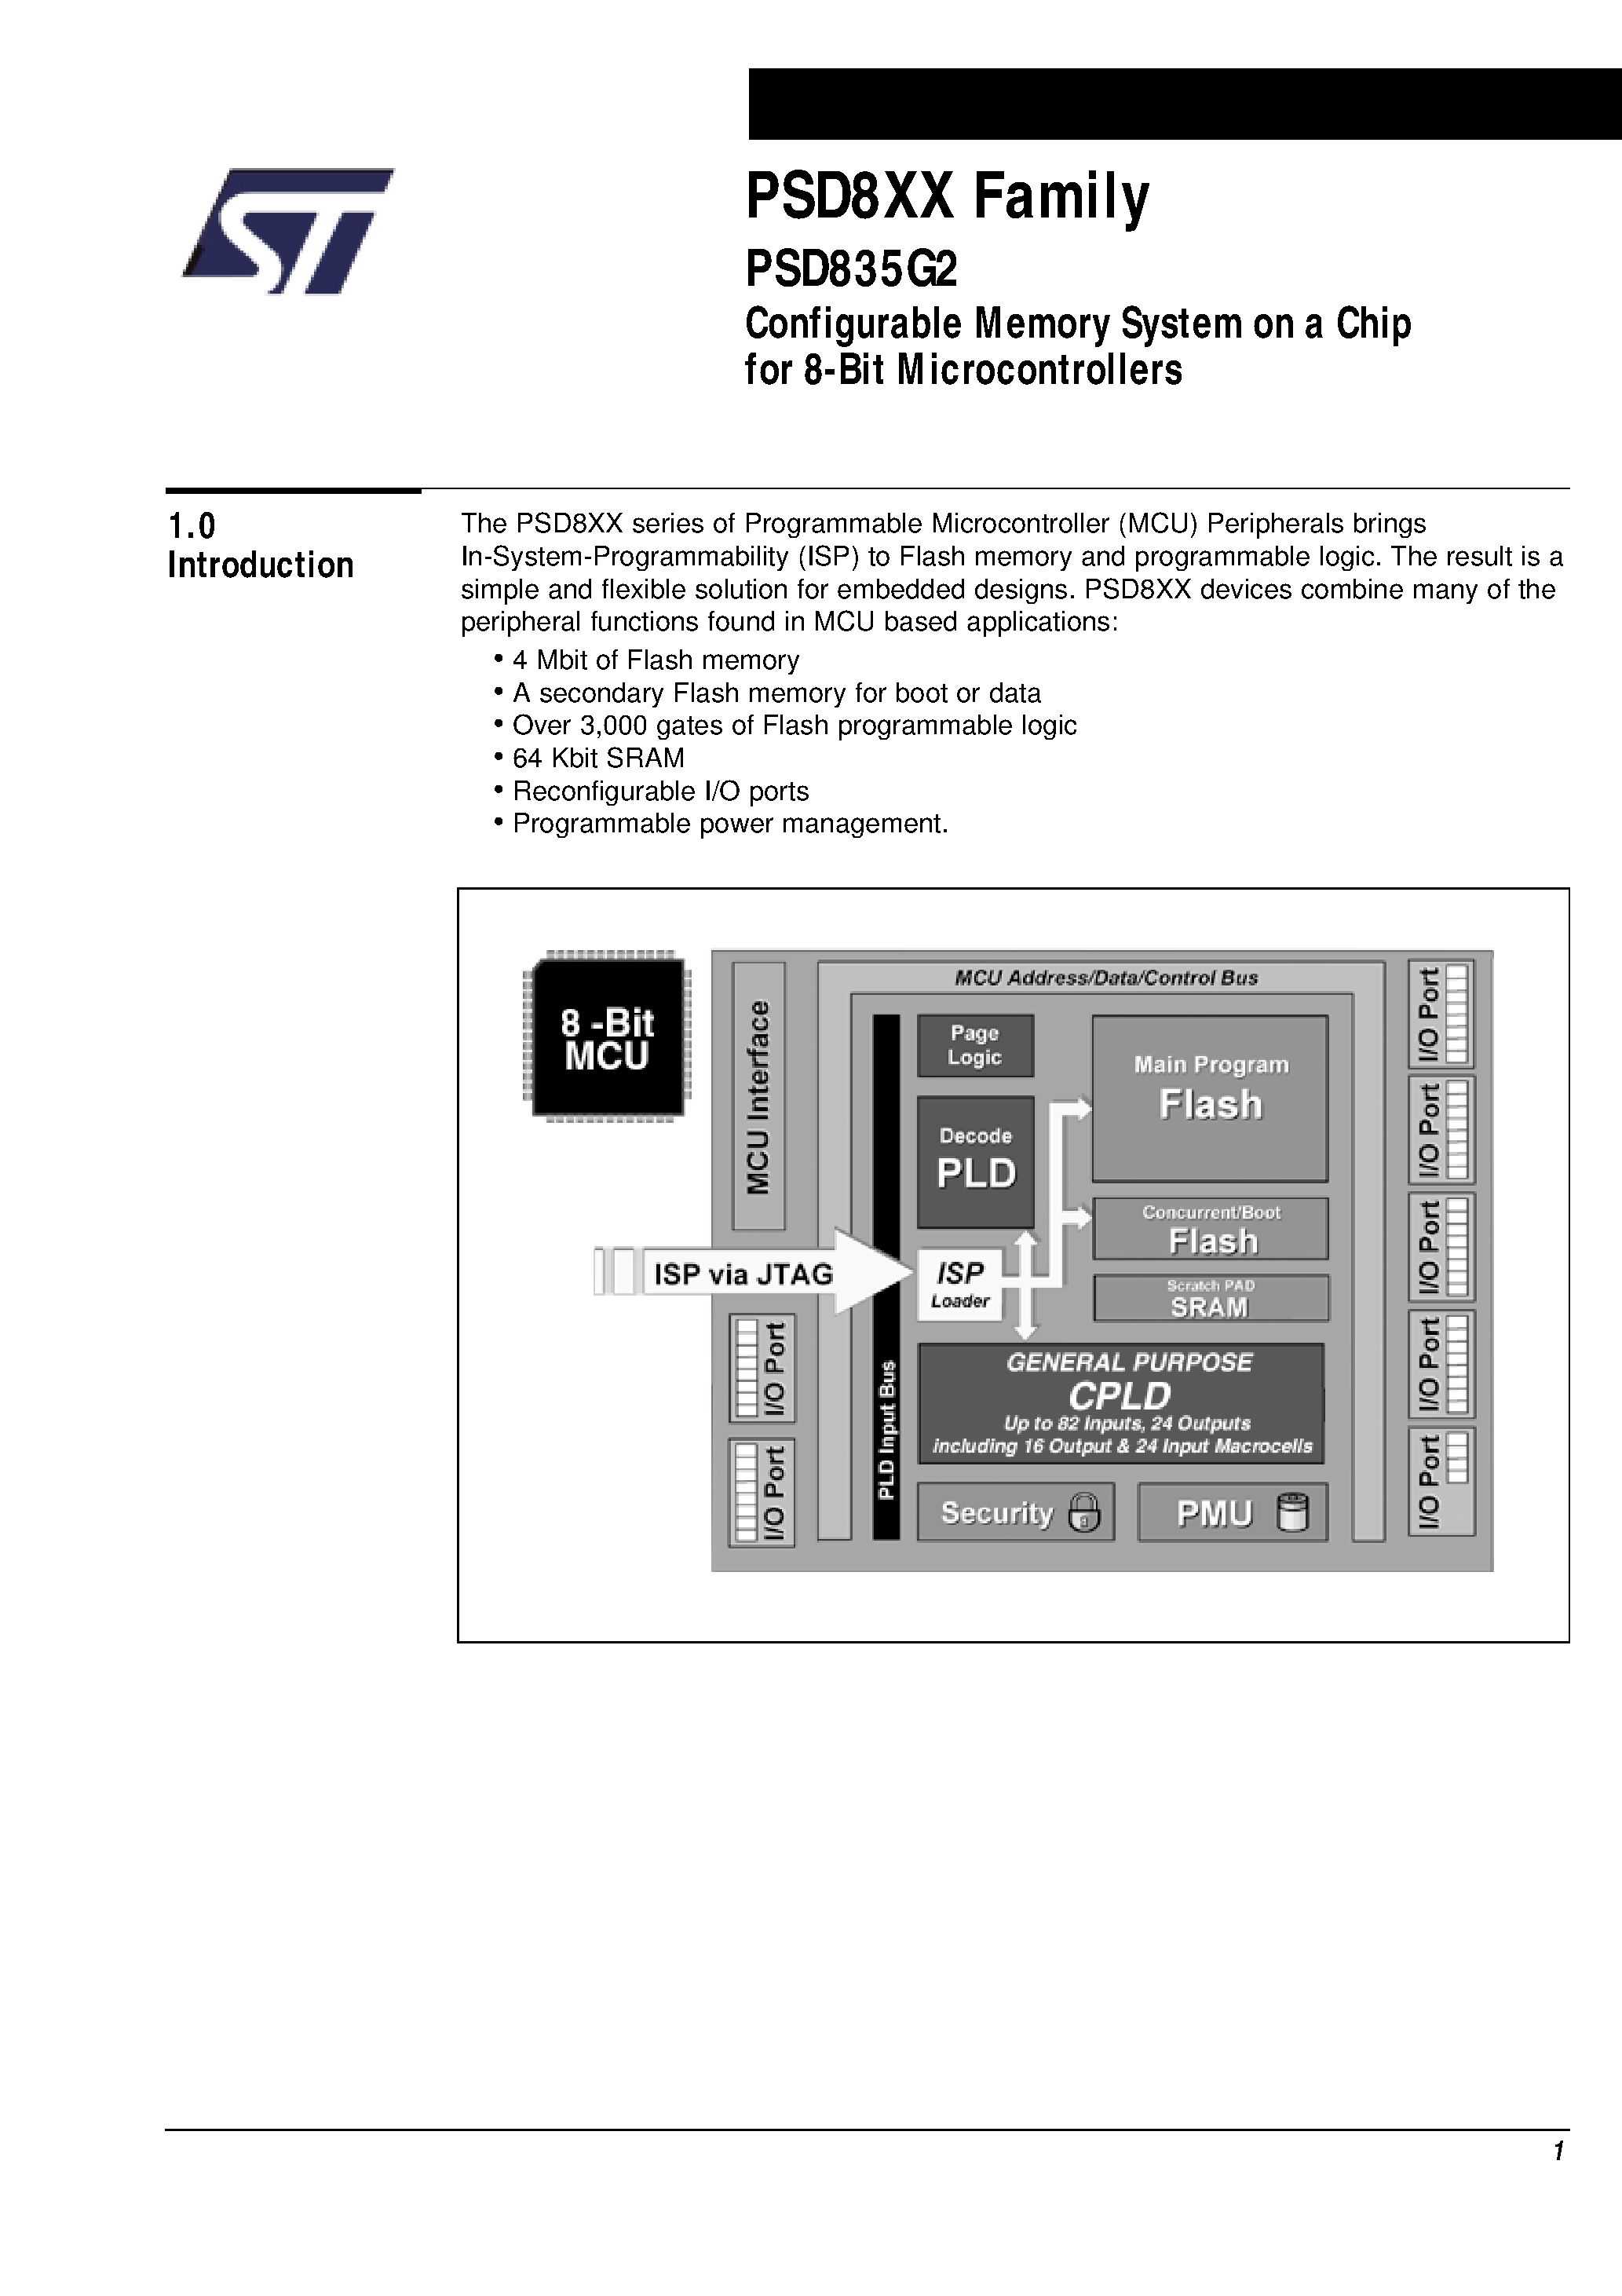 Datasheet PSD835F2V-A-15UI - Configurable Memory System on a Chip for 8-Bit Microcontrollers page 2